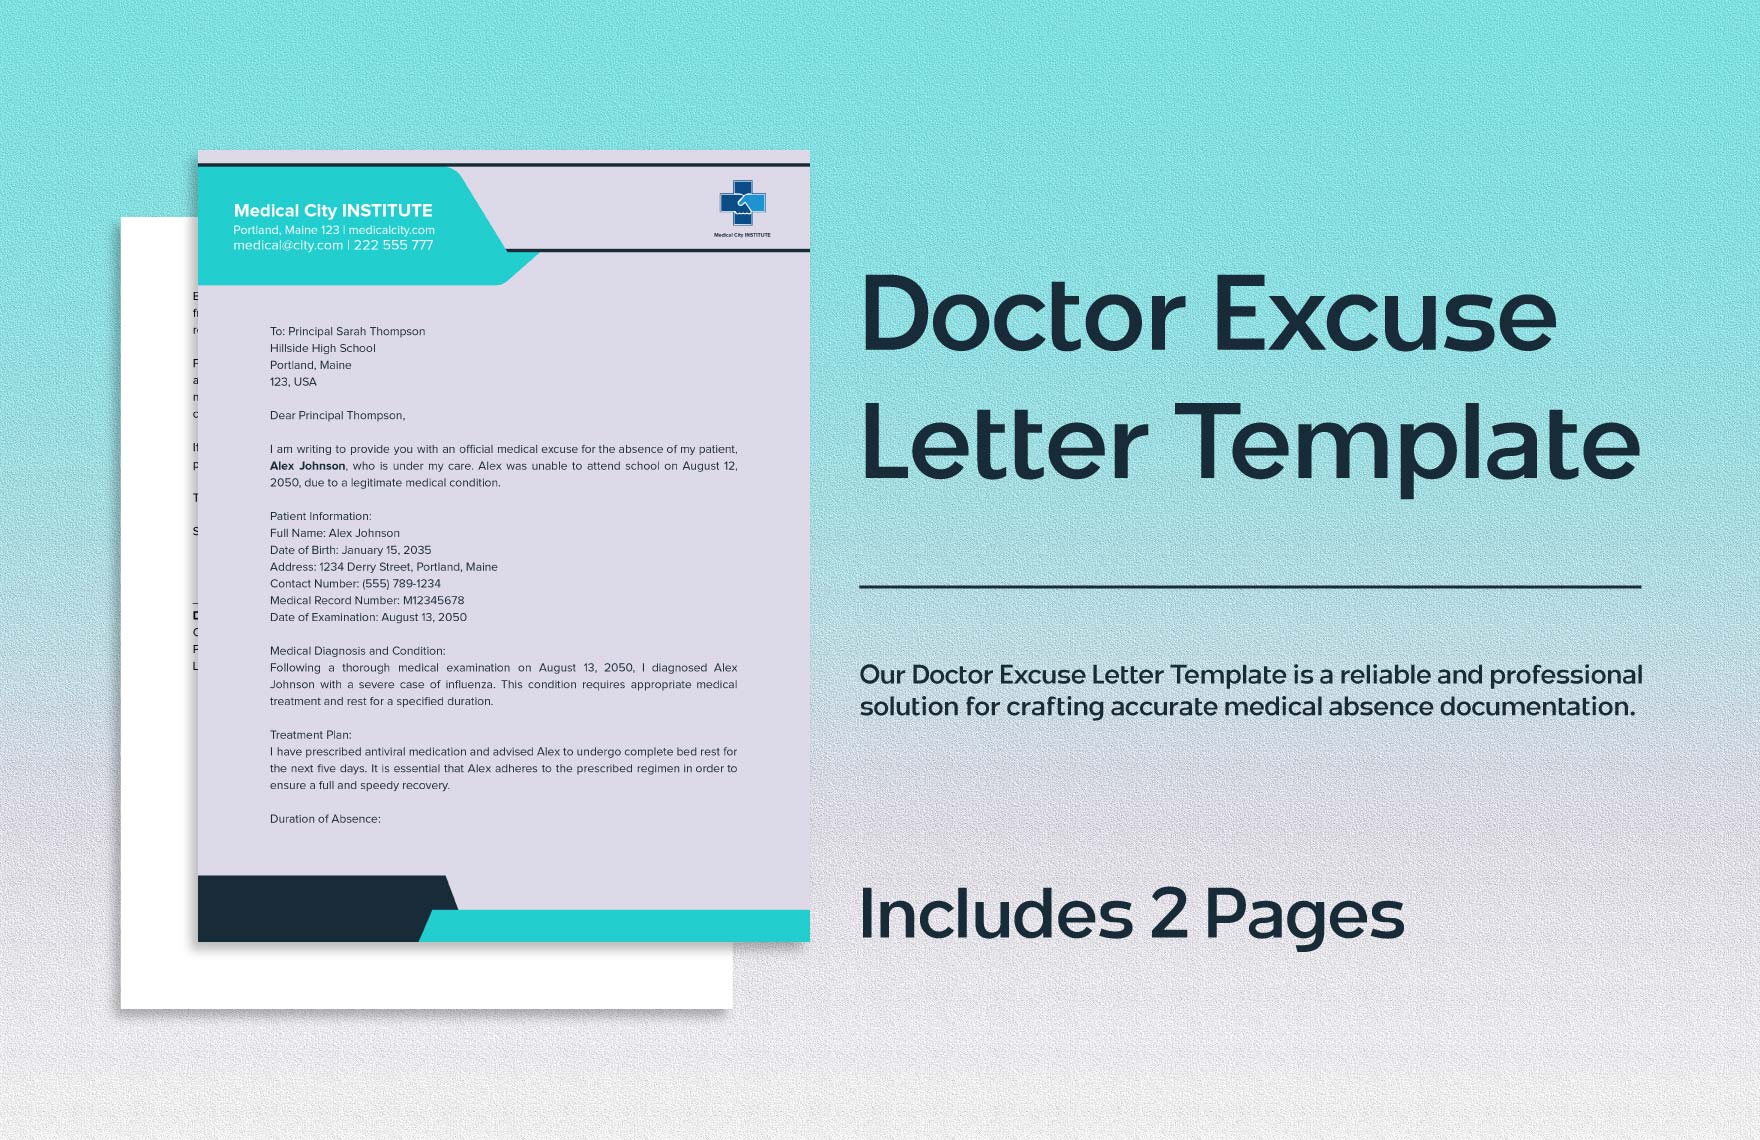 Doctor Excuse Letter Template